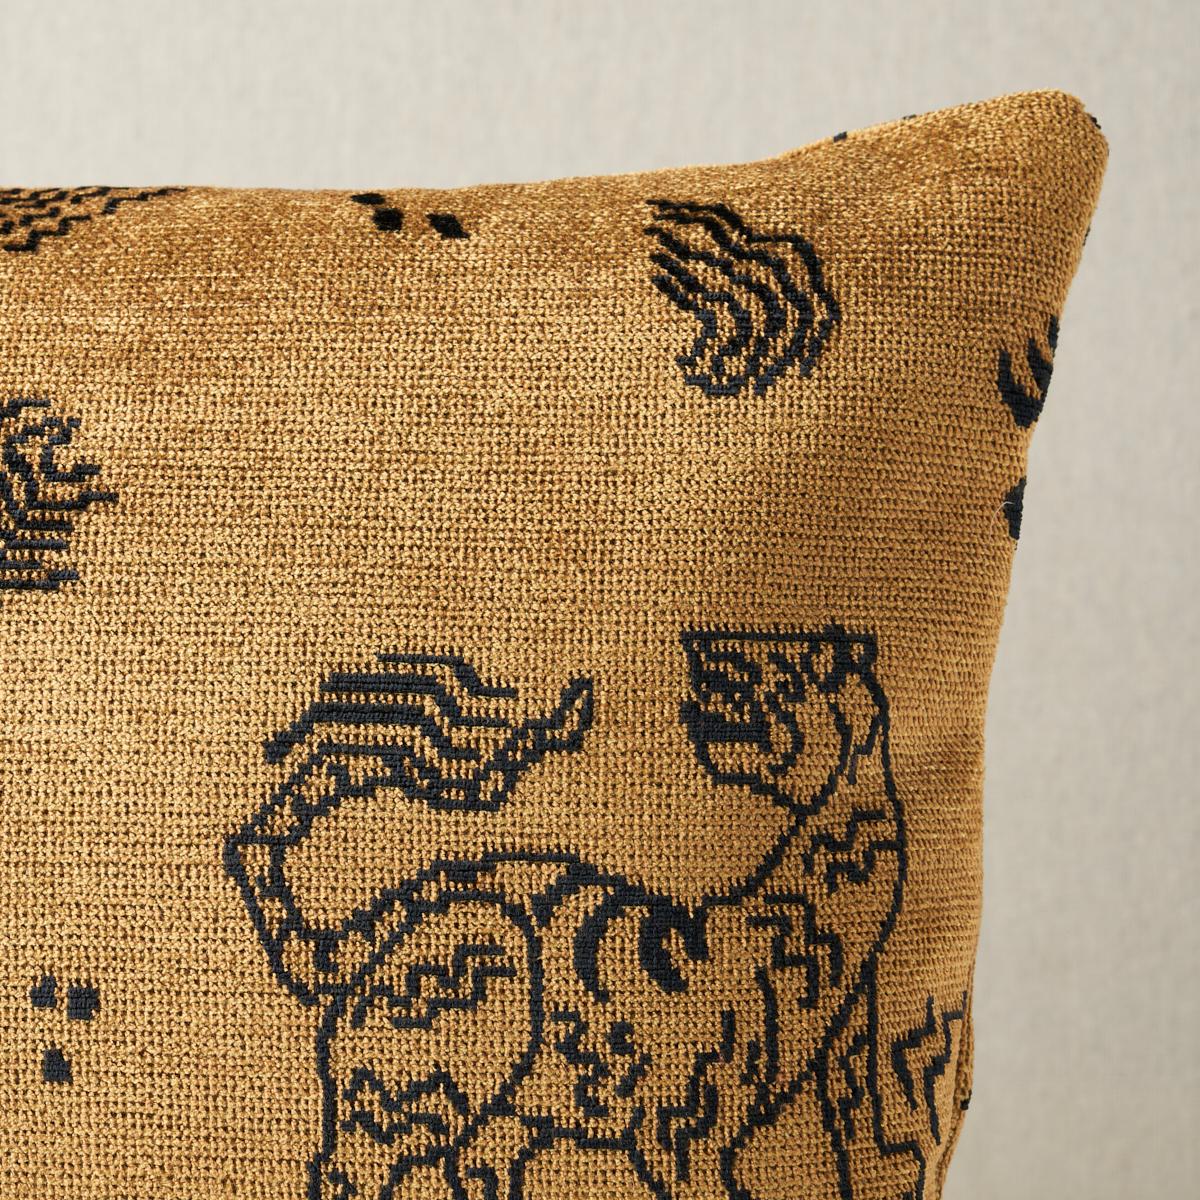 This pillow features Kinabalu Velvet with a knife edge finish. Featuring abstracted tiger motifs and a dense, shimmery pile, Kinabalu Velvet in gold was inspired by antique Tibetan carpet designs. Pillow includes a feather/down fill insert and